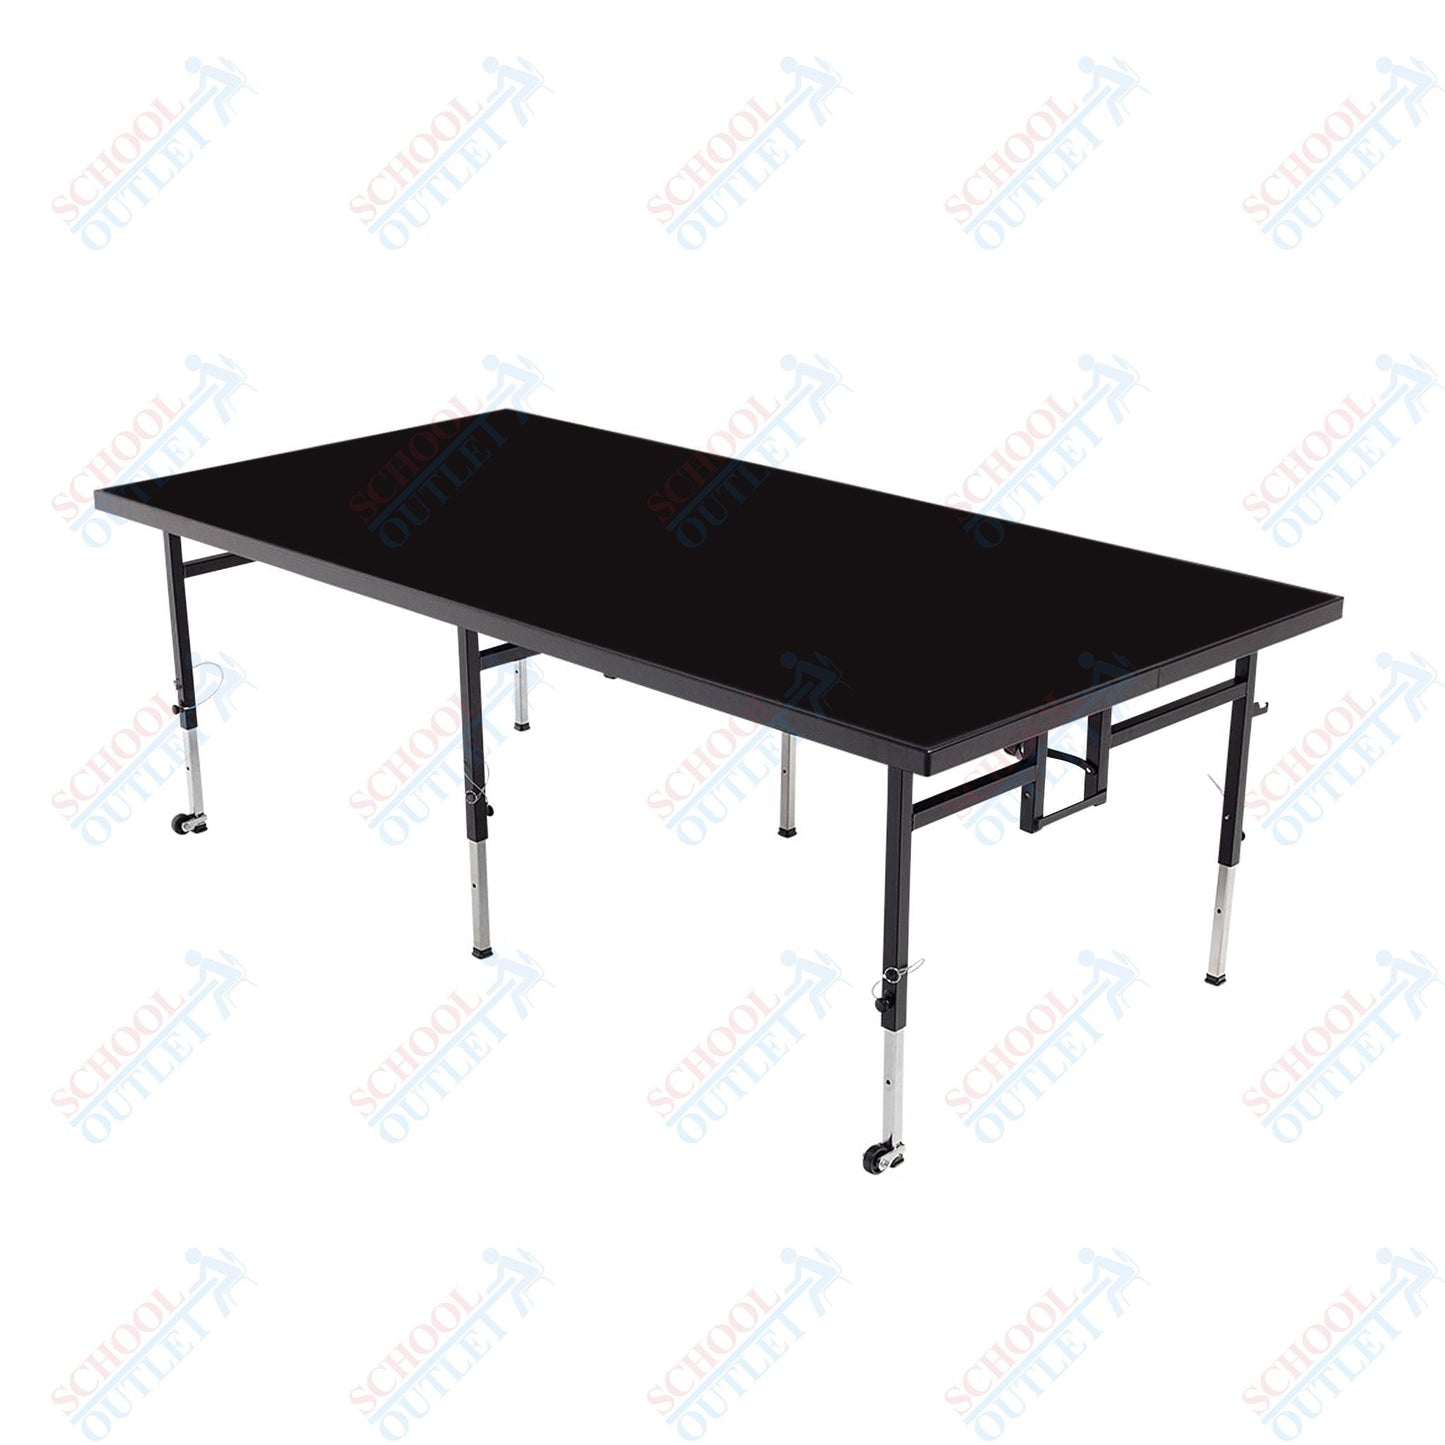 AmTab Adjustable Height Stage - Polypropylene Top - 36"W x 96"L x Adjustable 16" to 24"H (AmTab AMT-STA3816P) - SchoolOutlet